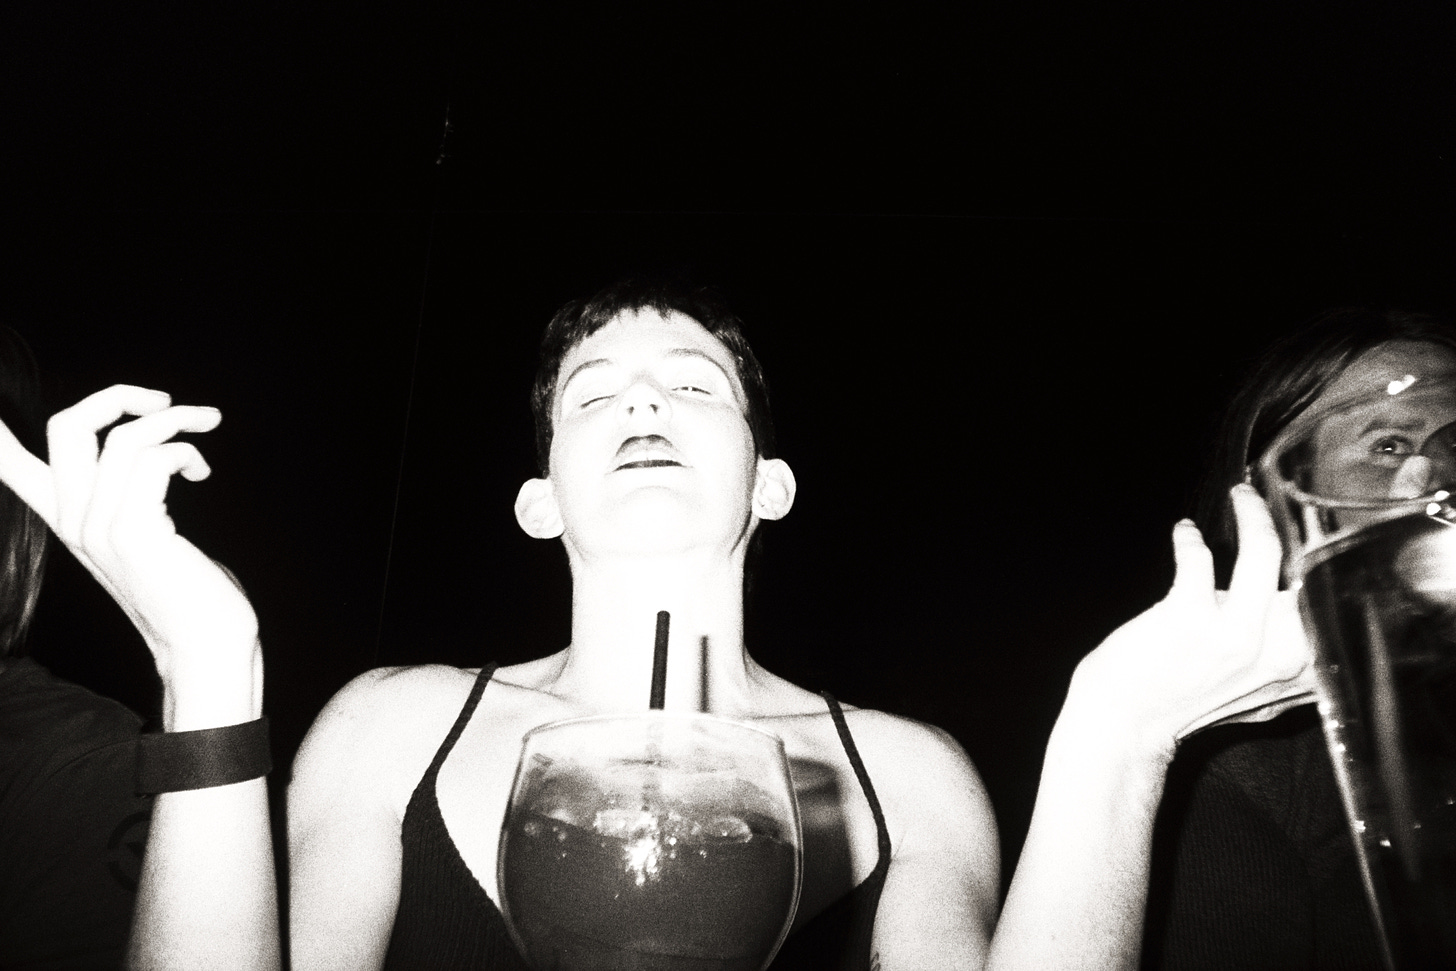 Black and white photograph of Lyss with their eyes closed and hands outstretched, wearing black lipstick and a black top. The photo is grainy and has a vintage vibe to it. The background is completely black, and the camera flash has illuminated the foreground to complete white.